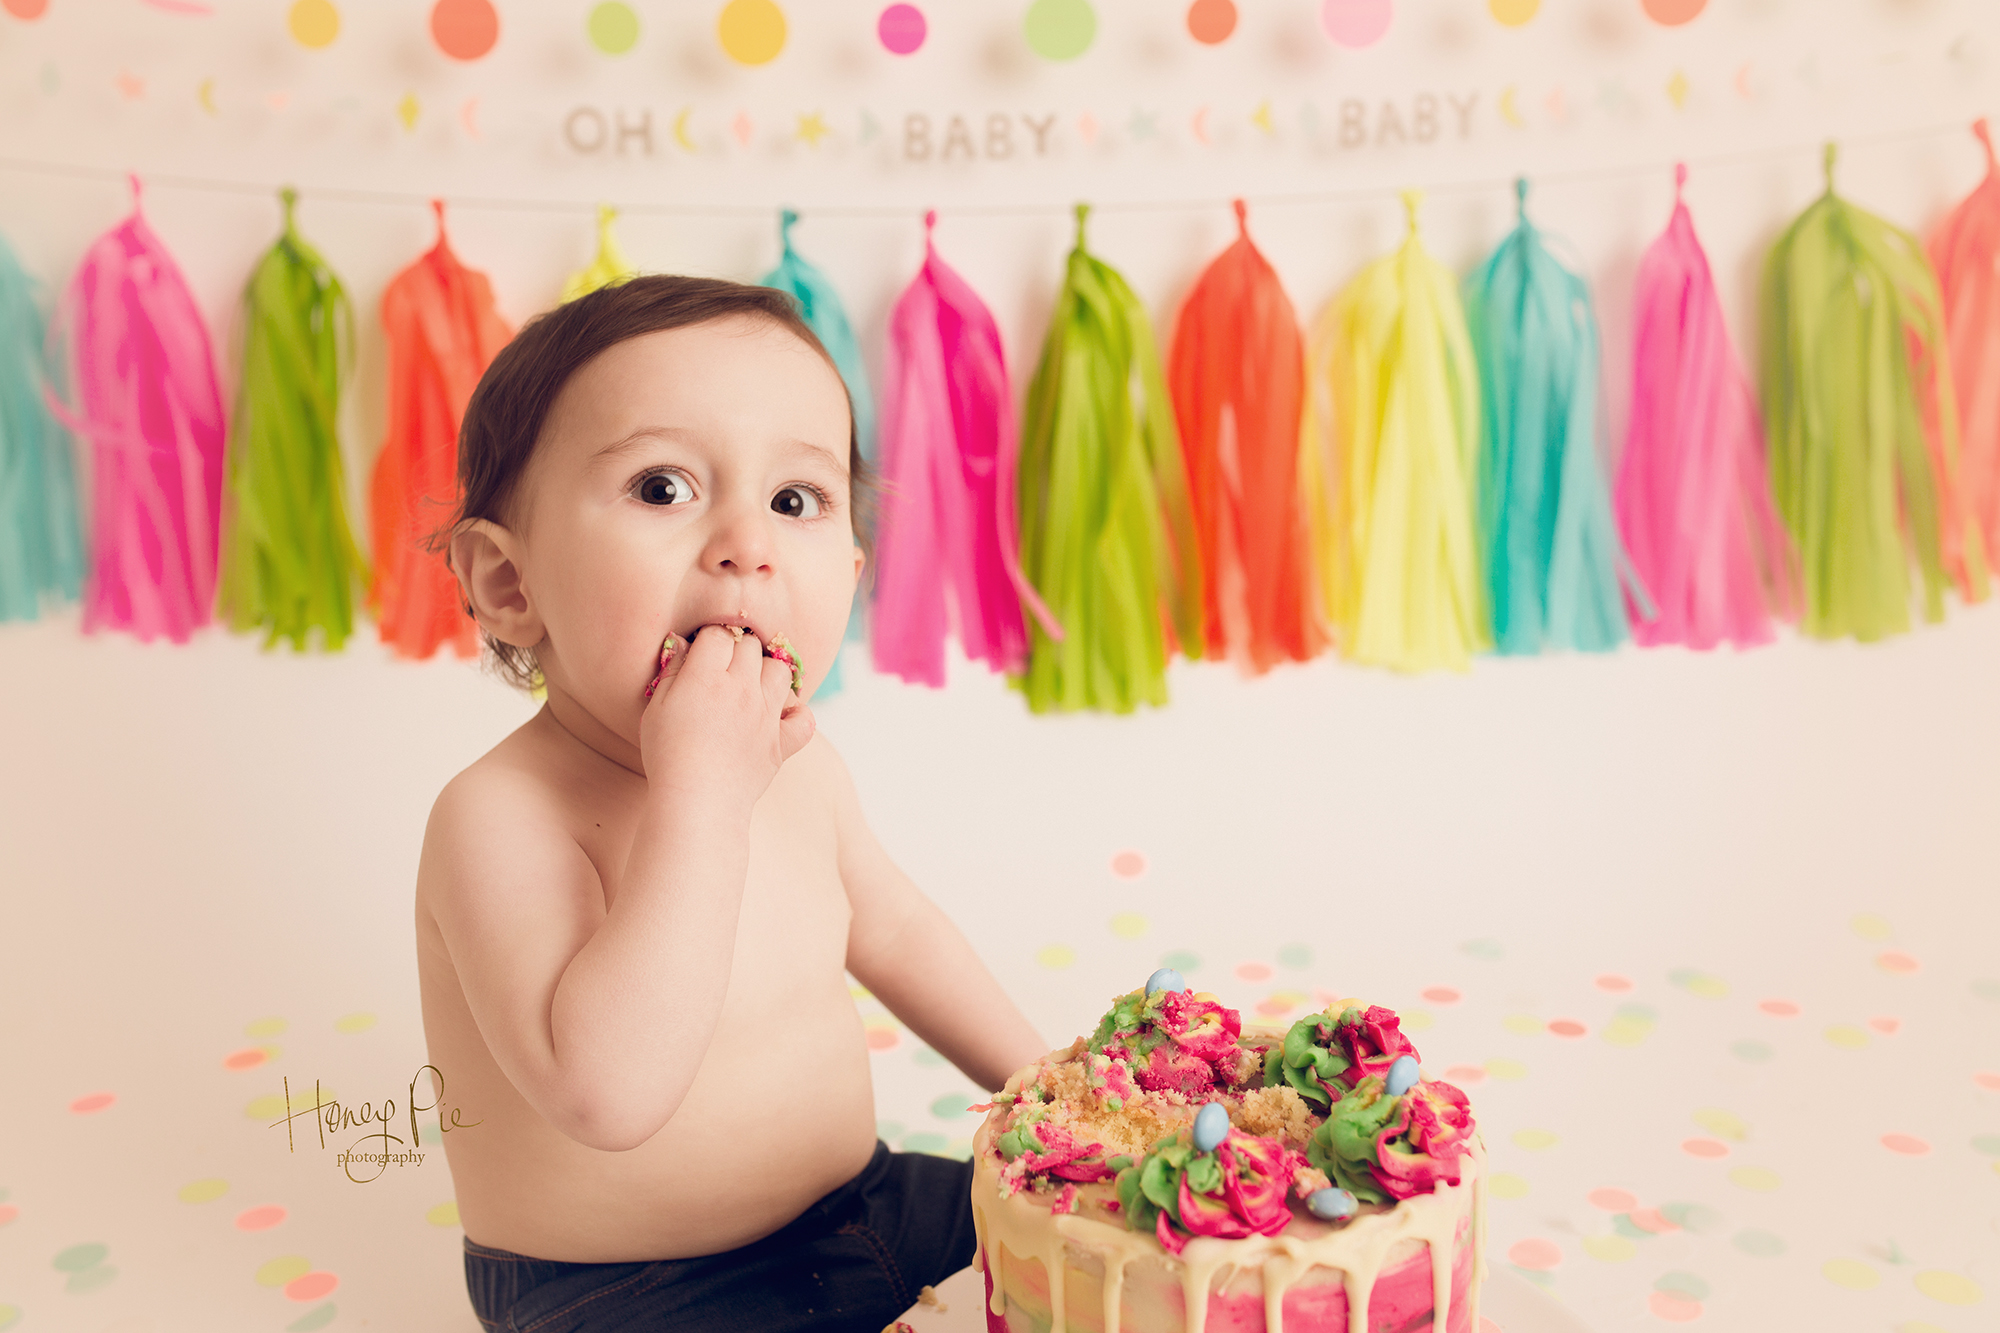 Baby getting a handful of cake in his mouth at photography session surrounded by neon party decorations